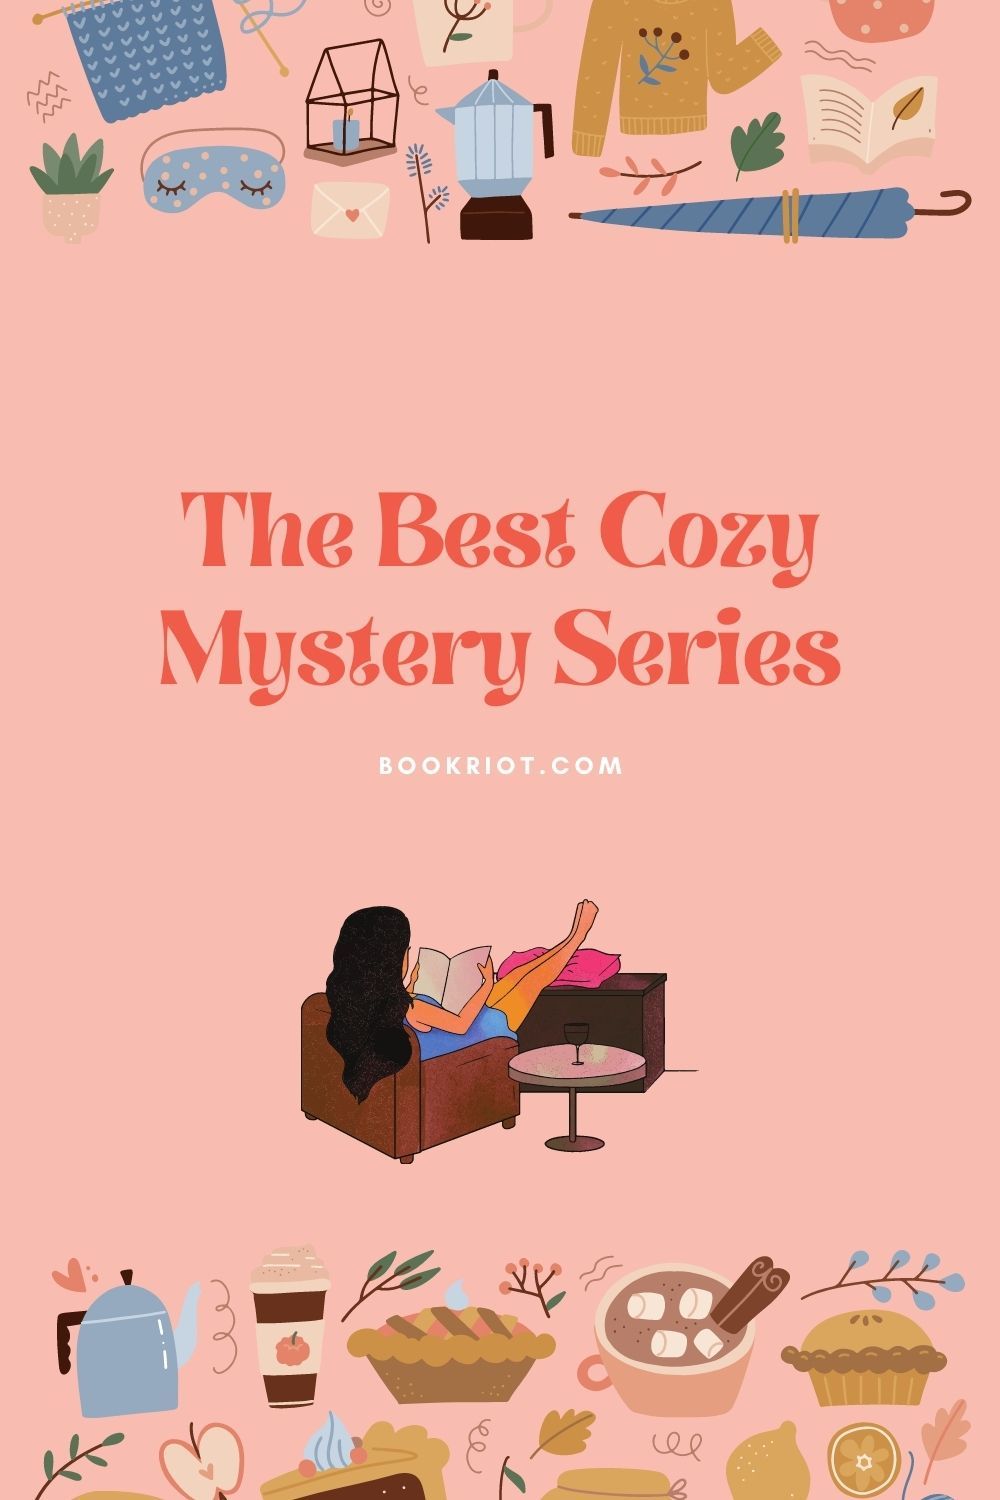 The Best Cozy Mystery Series to Read Right Now Book Riot